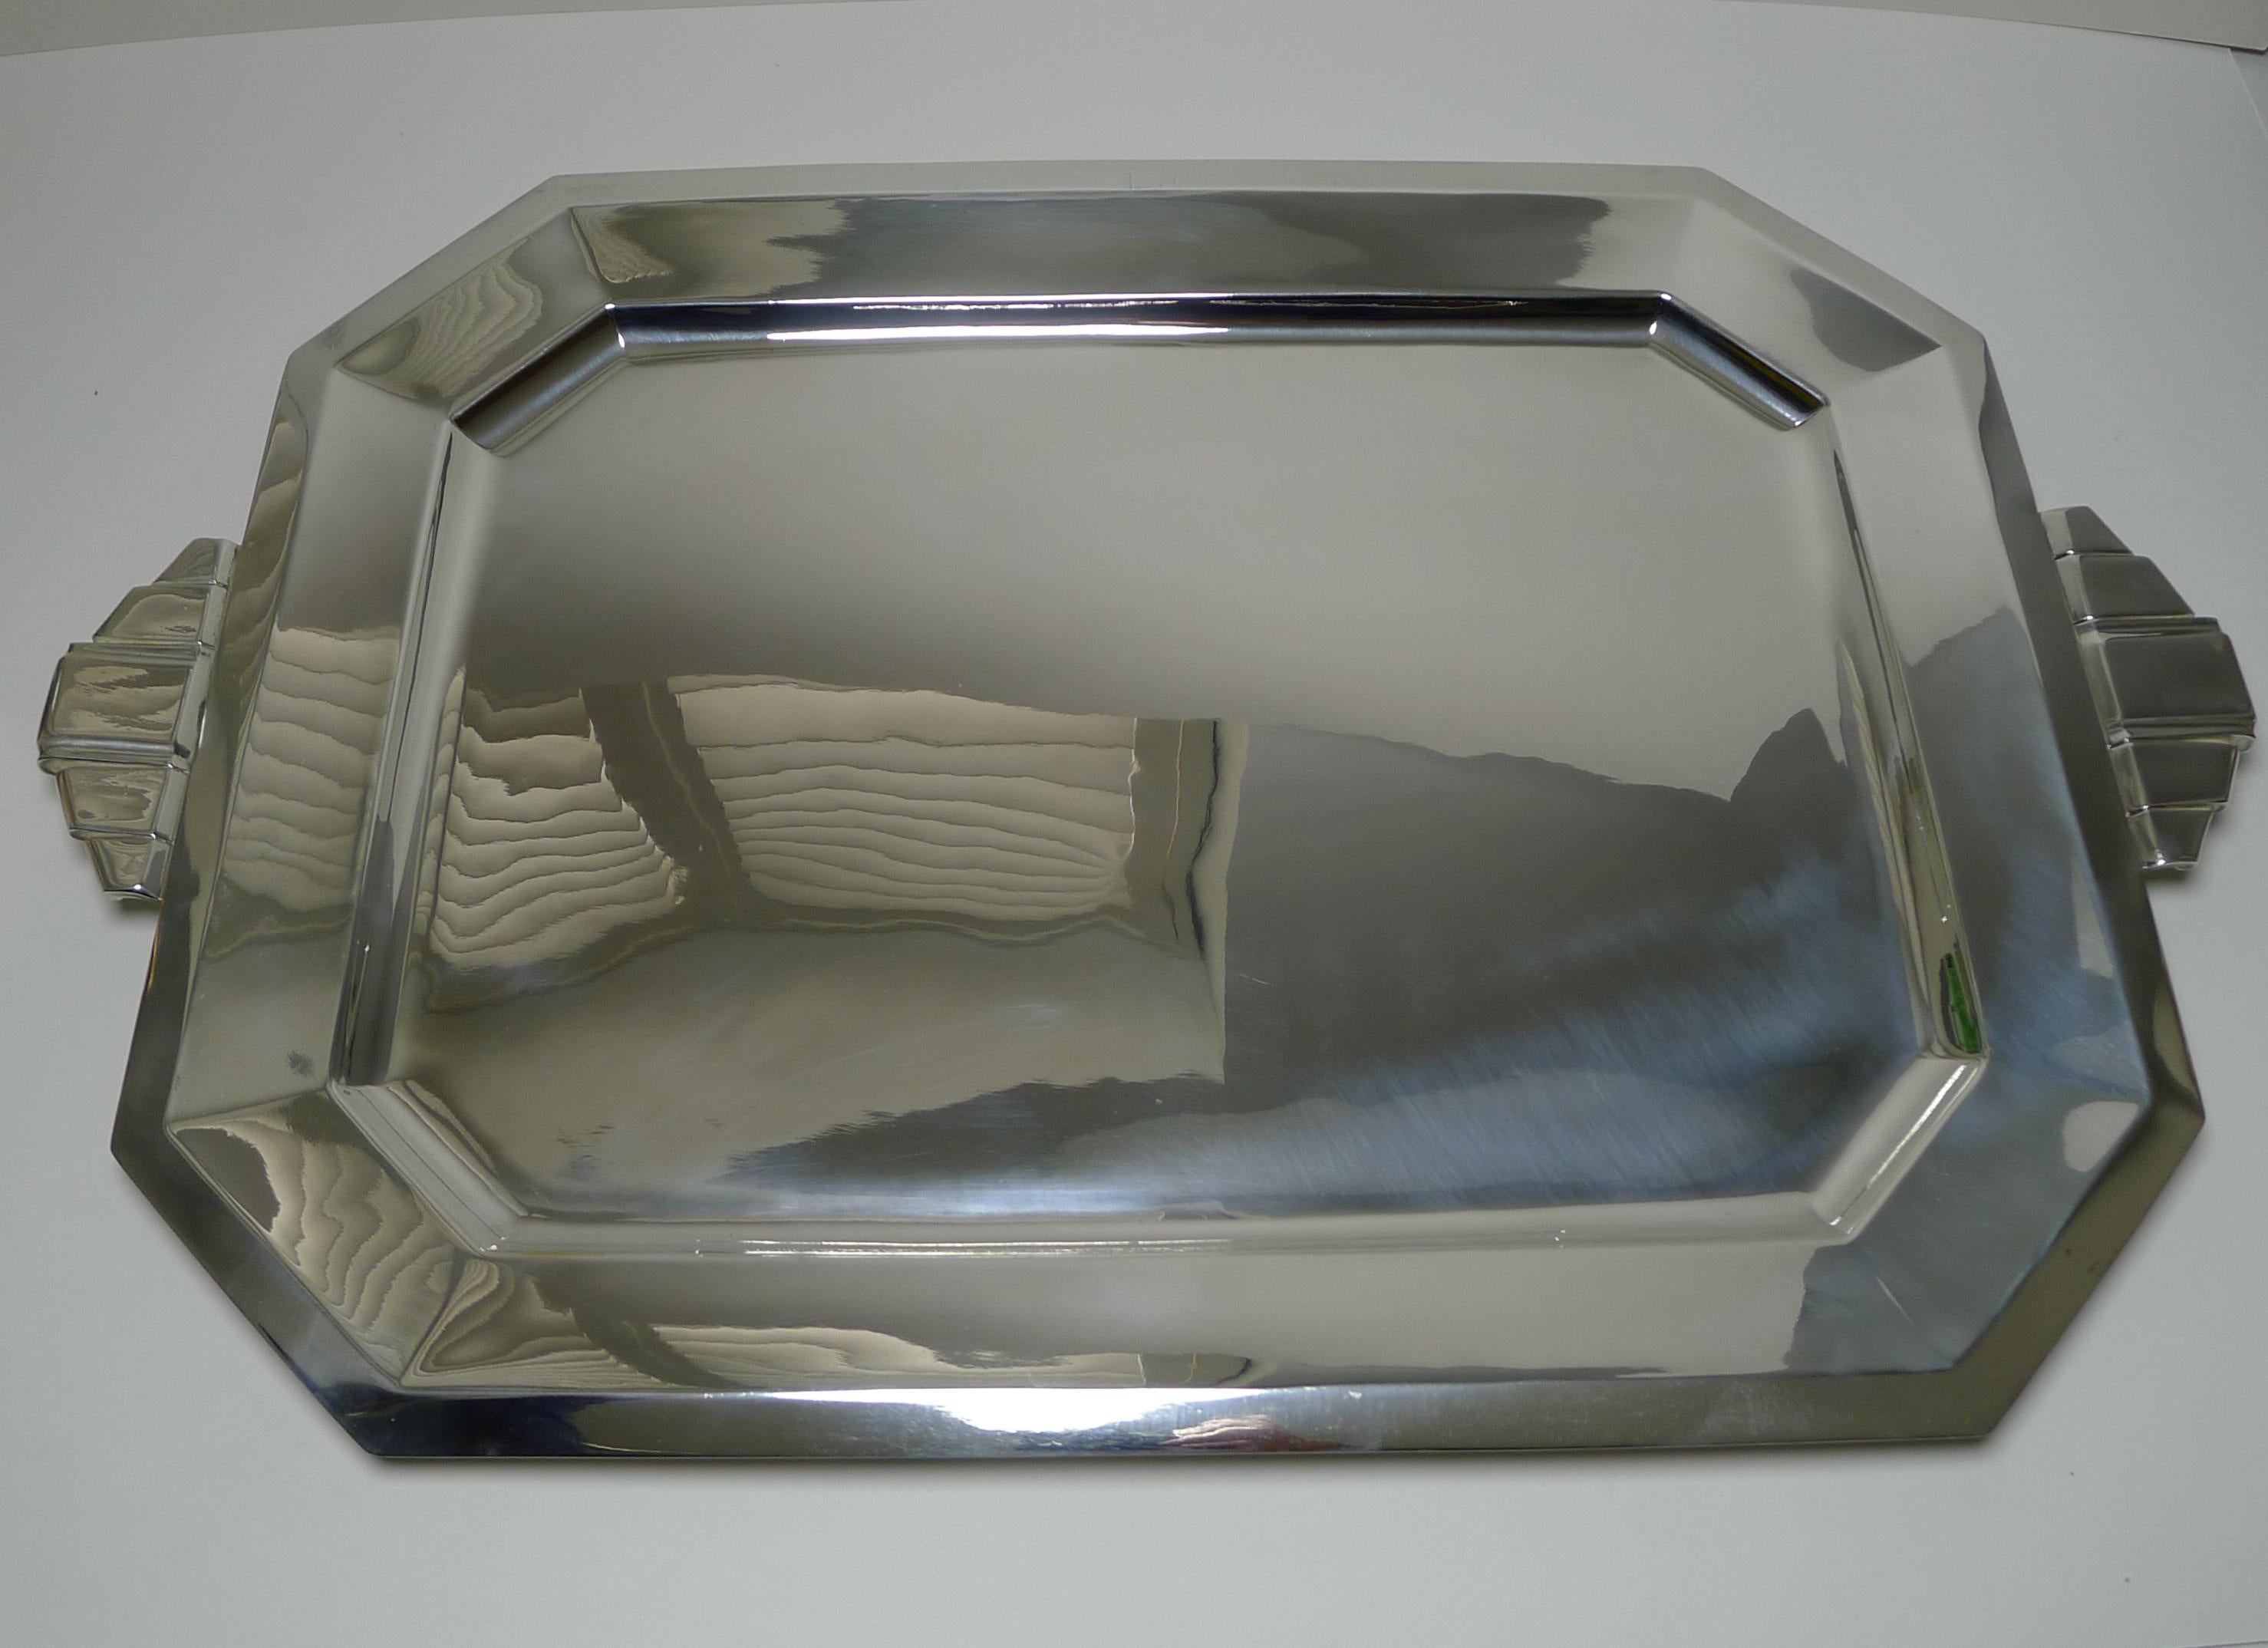 A magnificent and stylish French Art Deco Drinks or serving tray.

Just back from our silversmith's workshop where it has been professionally cleaned and polished, restoring it to it's former glory, minor wear commensurate with age.

The mark